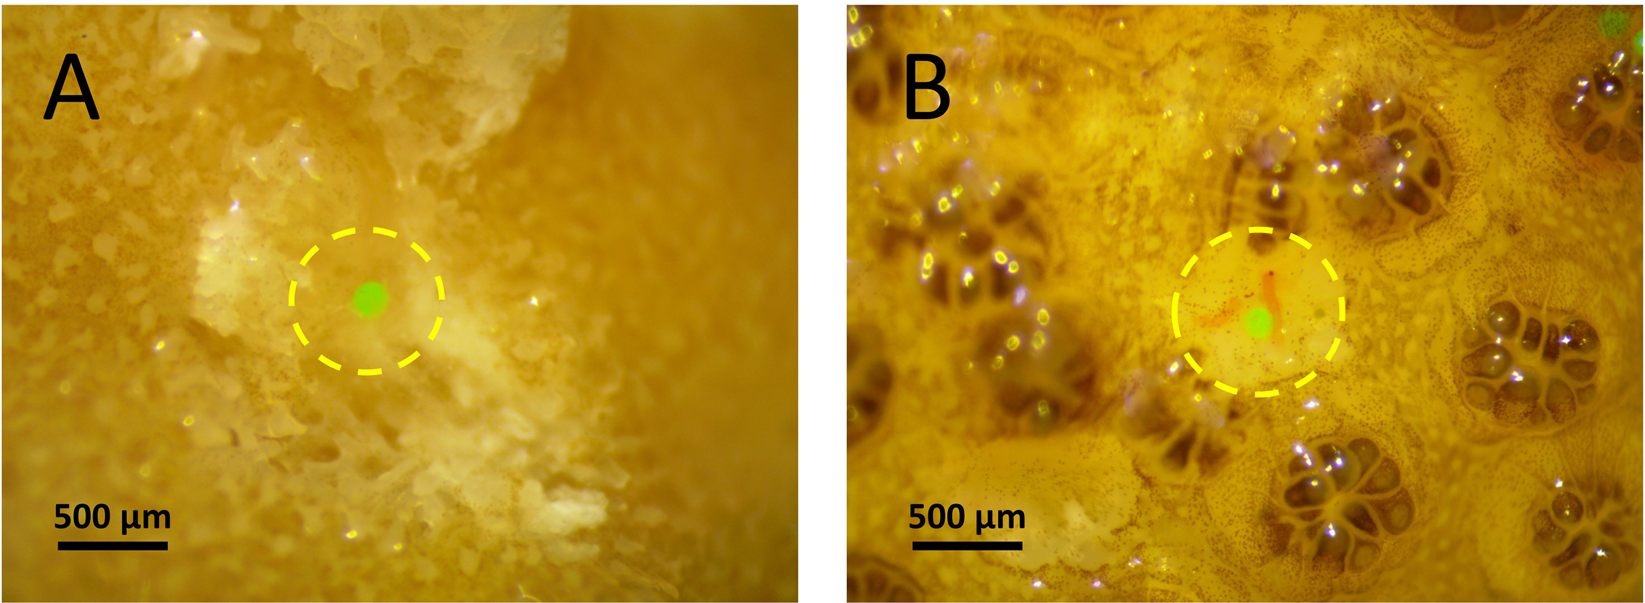 Microplastics ingestion and heterotrophy in thermally stressed corals |  Scientific Reports